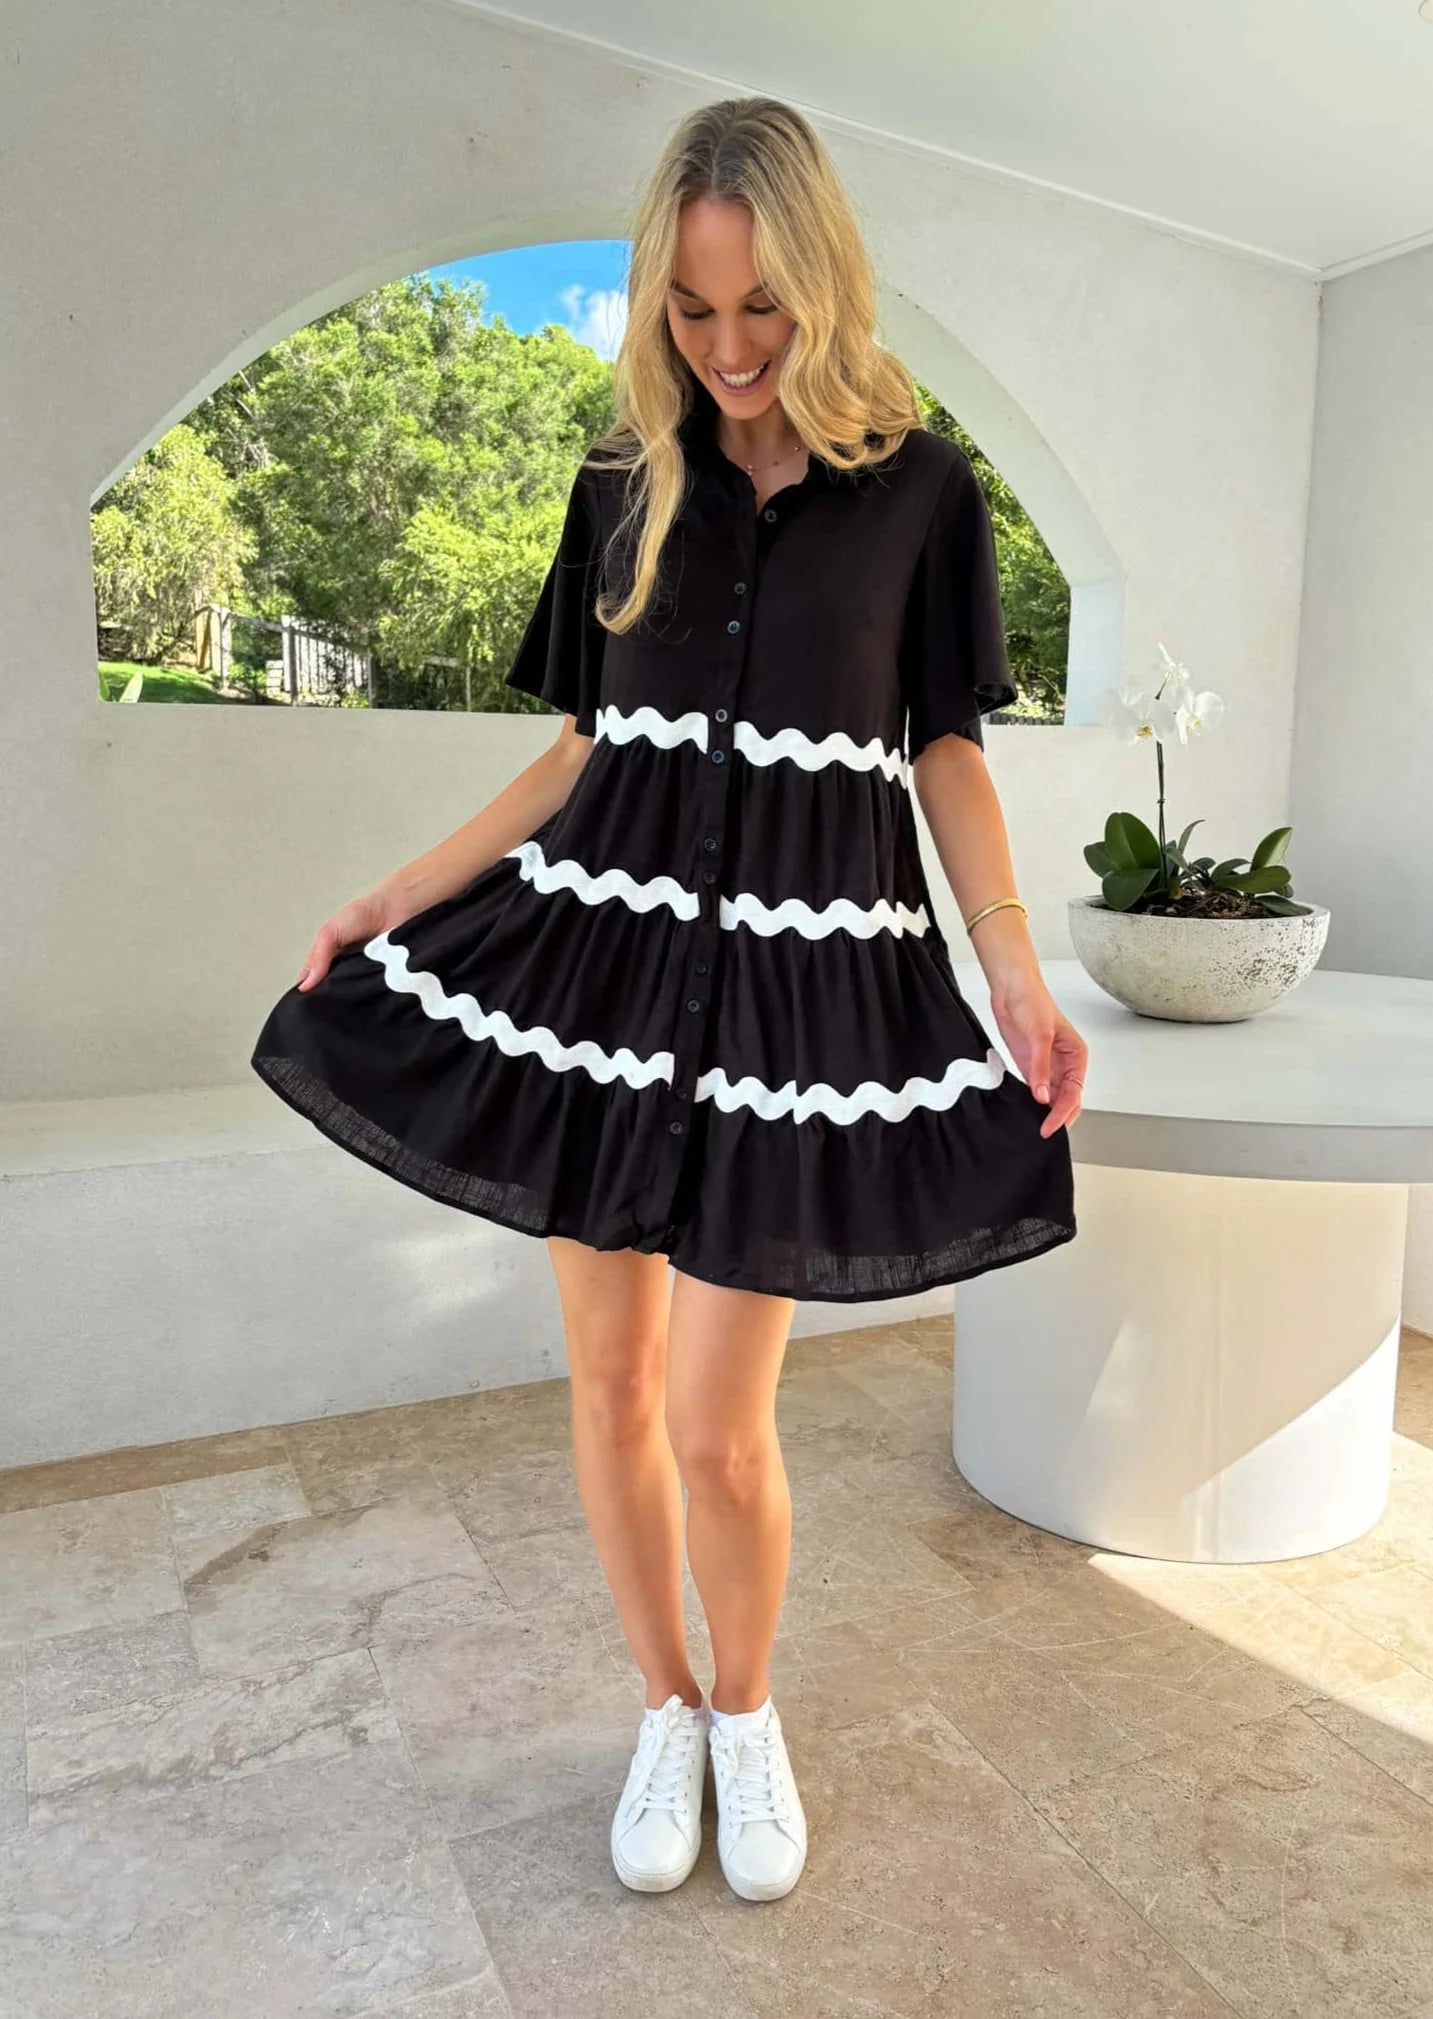 Unleash your playful side with the Kesha Ric Rac Dress. Featuring fun and quirky Ric Rac detailing, functional buttons, and convenient pockets, this mini length shift style dress is perfect for a day of fun and adventure. Add a touch of whimsy to your wardrobe with this black dress. (Get ready to turn heads with your unique style!)